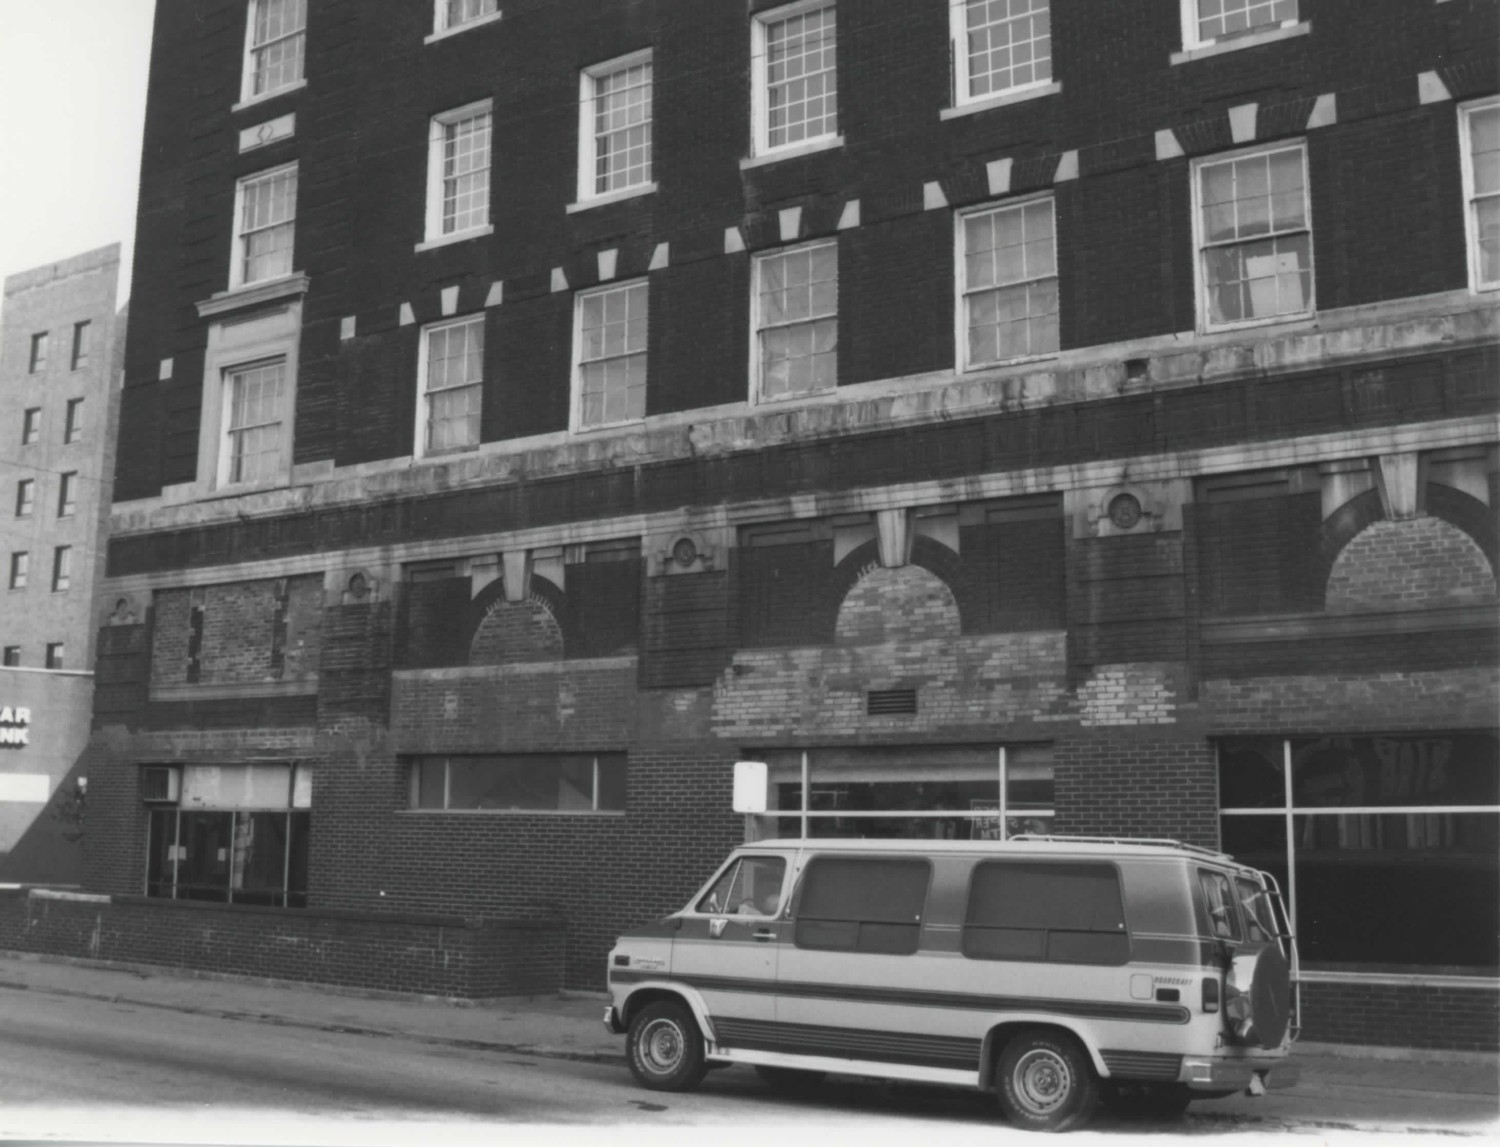 Marting Hotel, Ironton Ohio West elevation - first and second floor areas, north end (1998)